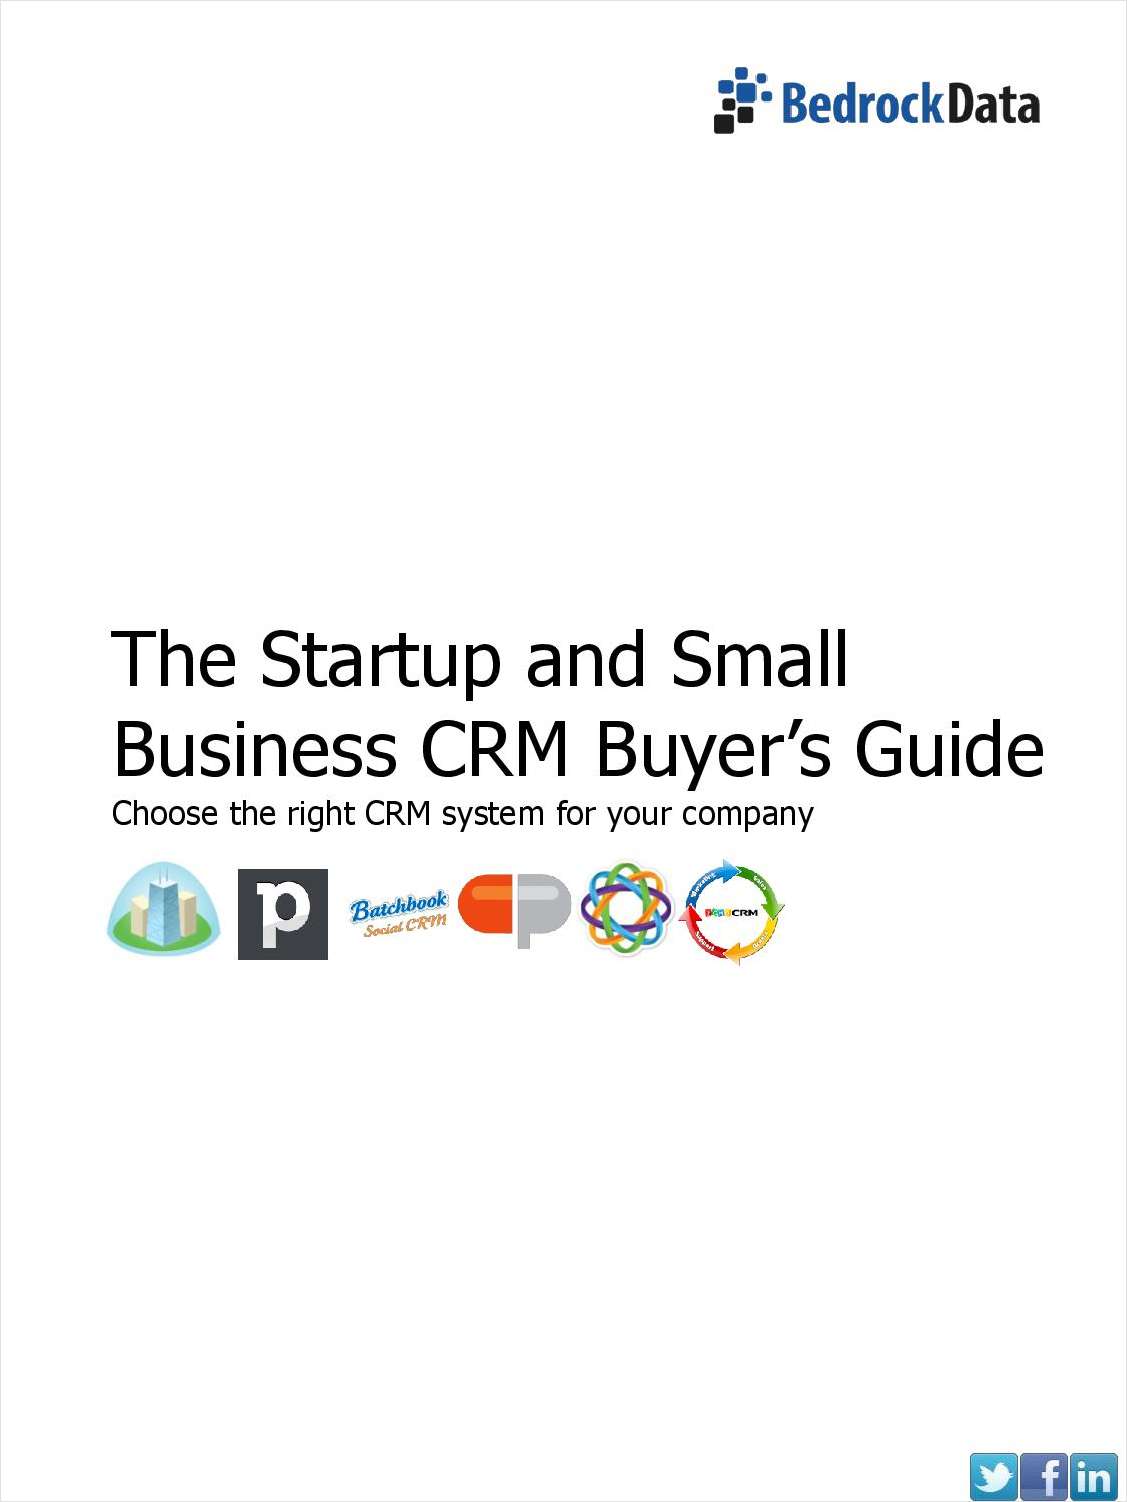 The Startup and Small Business CRM Buyer's Guide